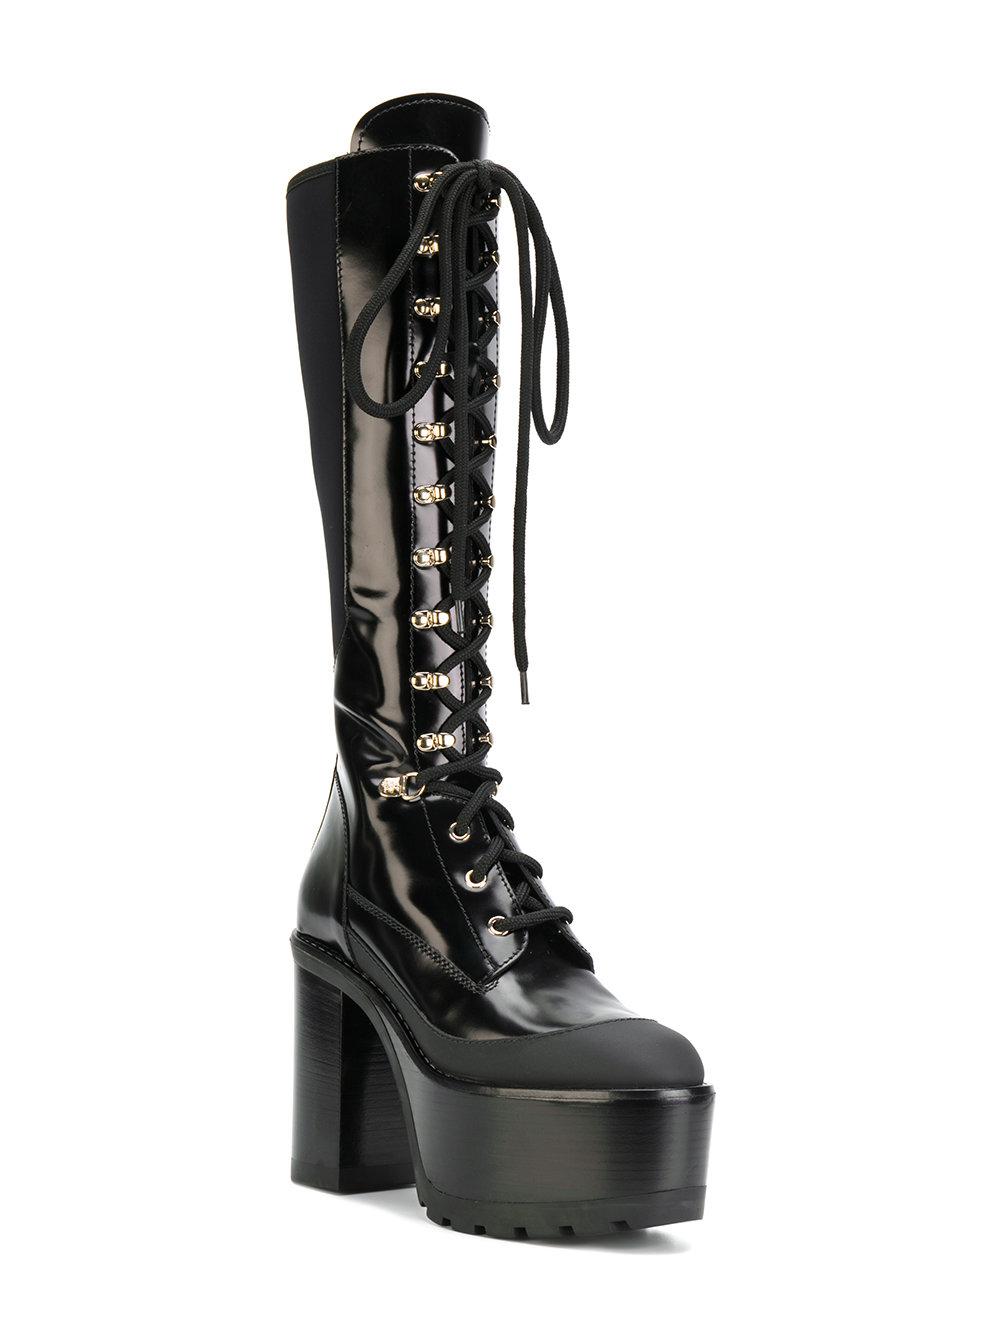 Versace Leather Platform Lace-up Boots in Black - Lyst